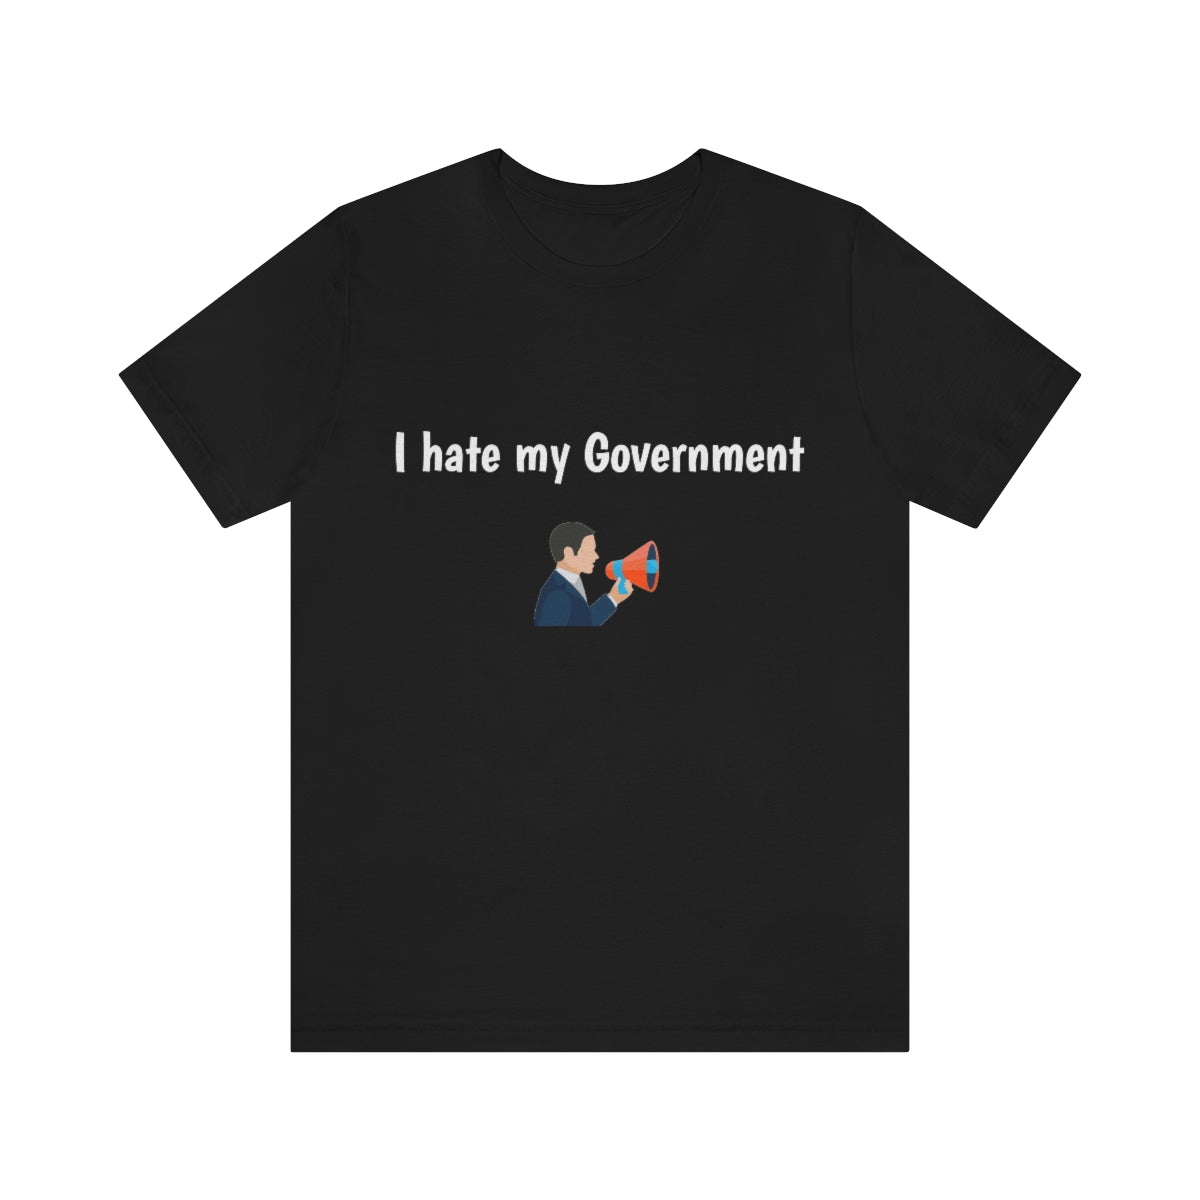 I hate my government - Funny - Unisex Short Sleeve Tee